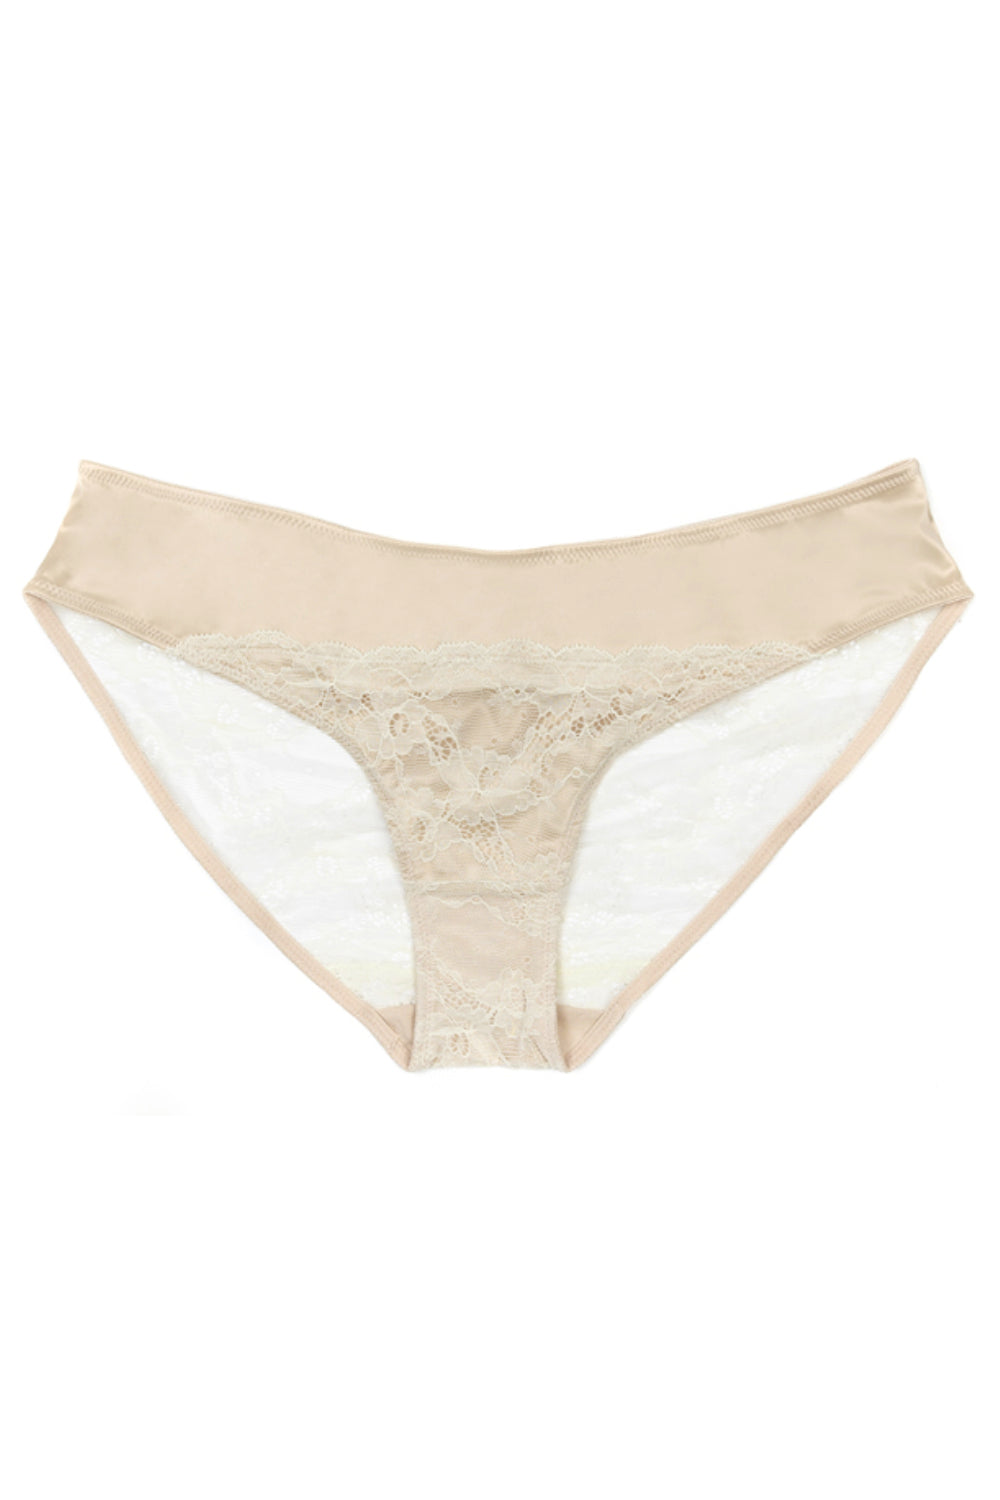 Gold and Ivory Maternity Briefs